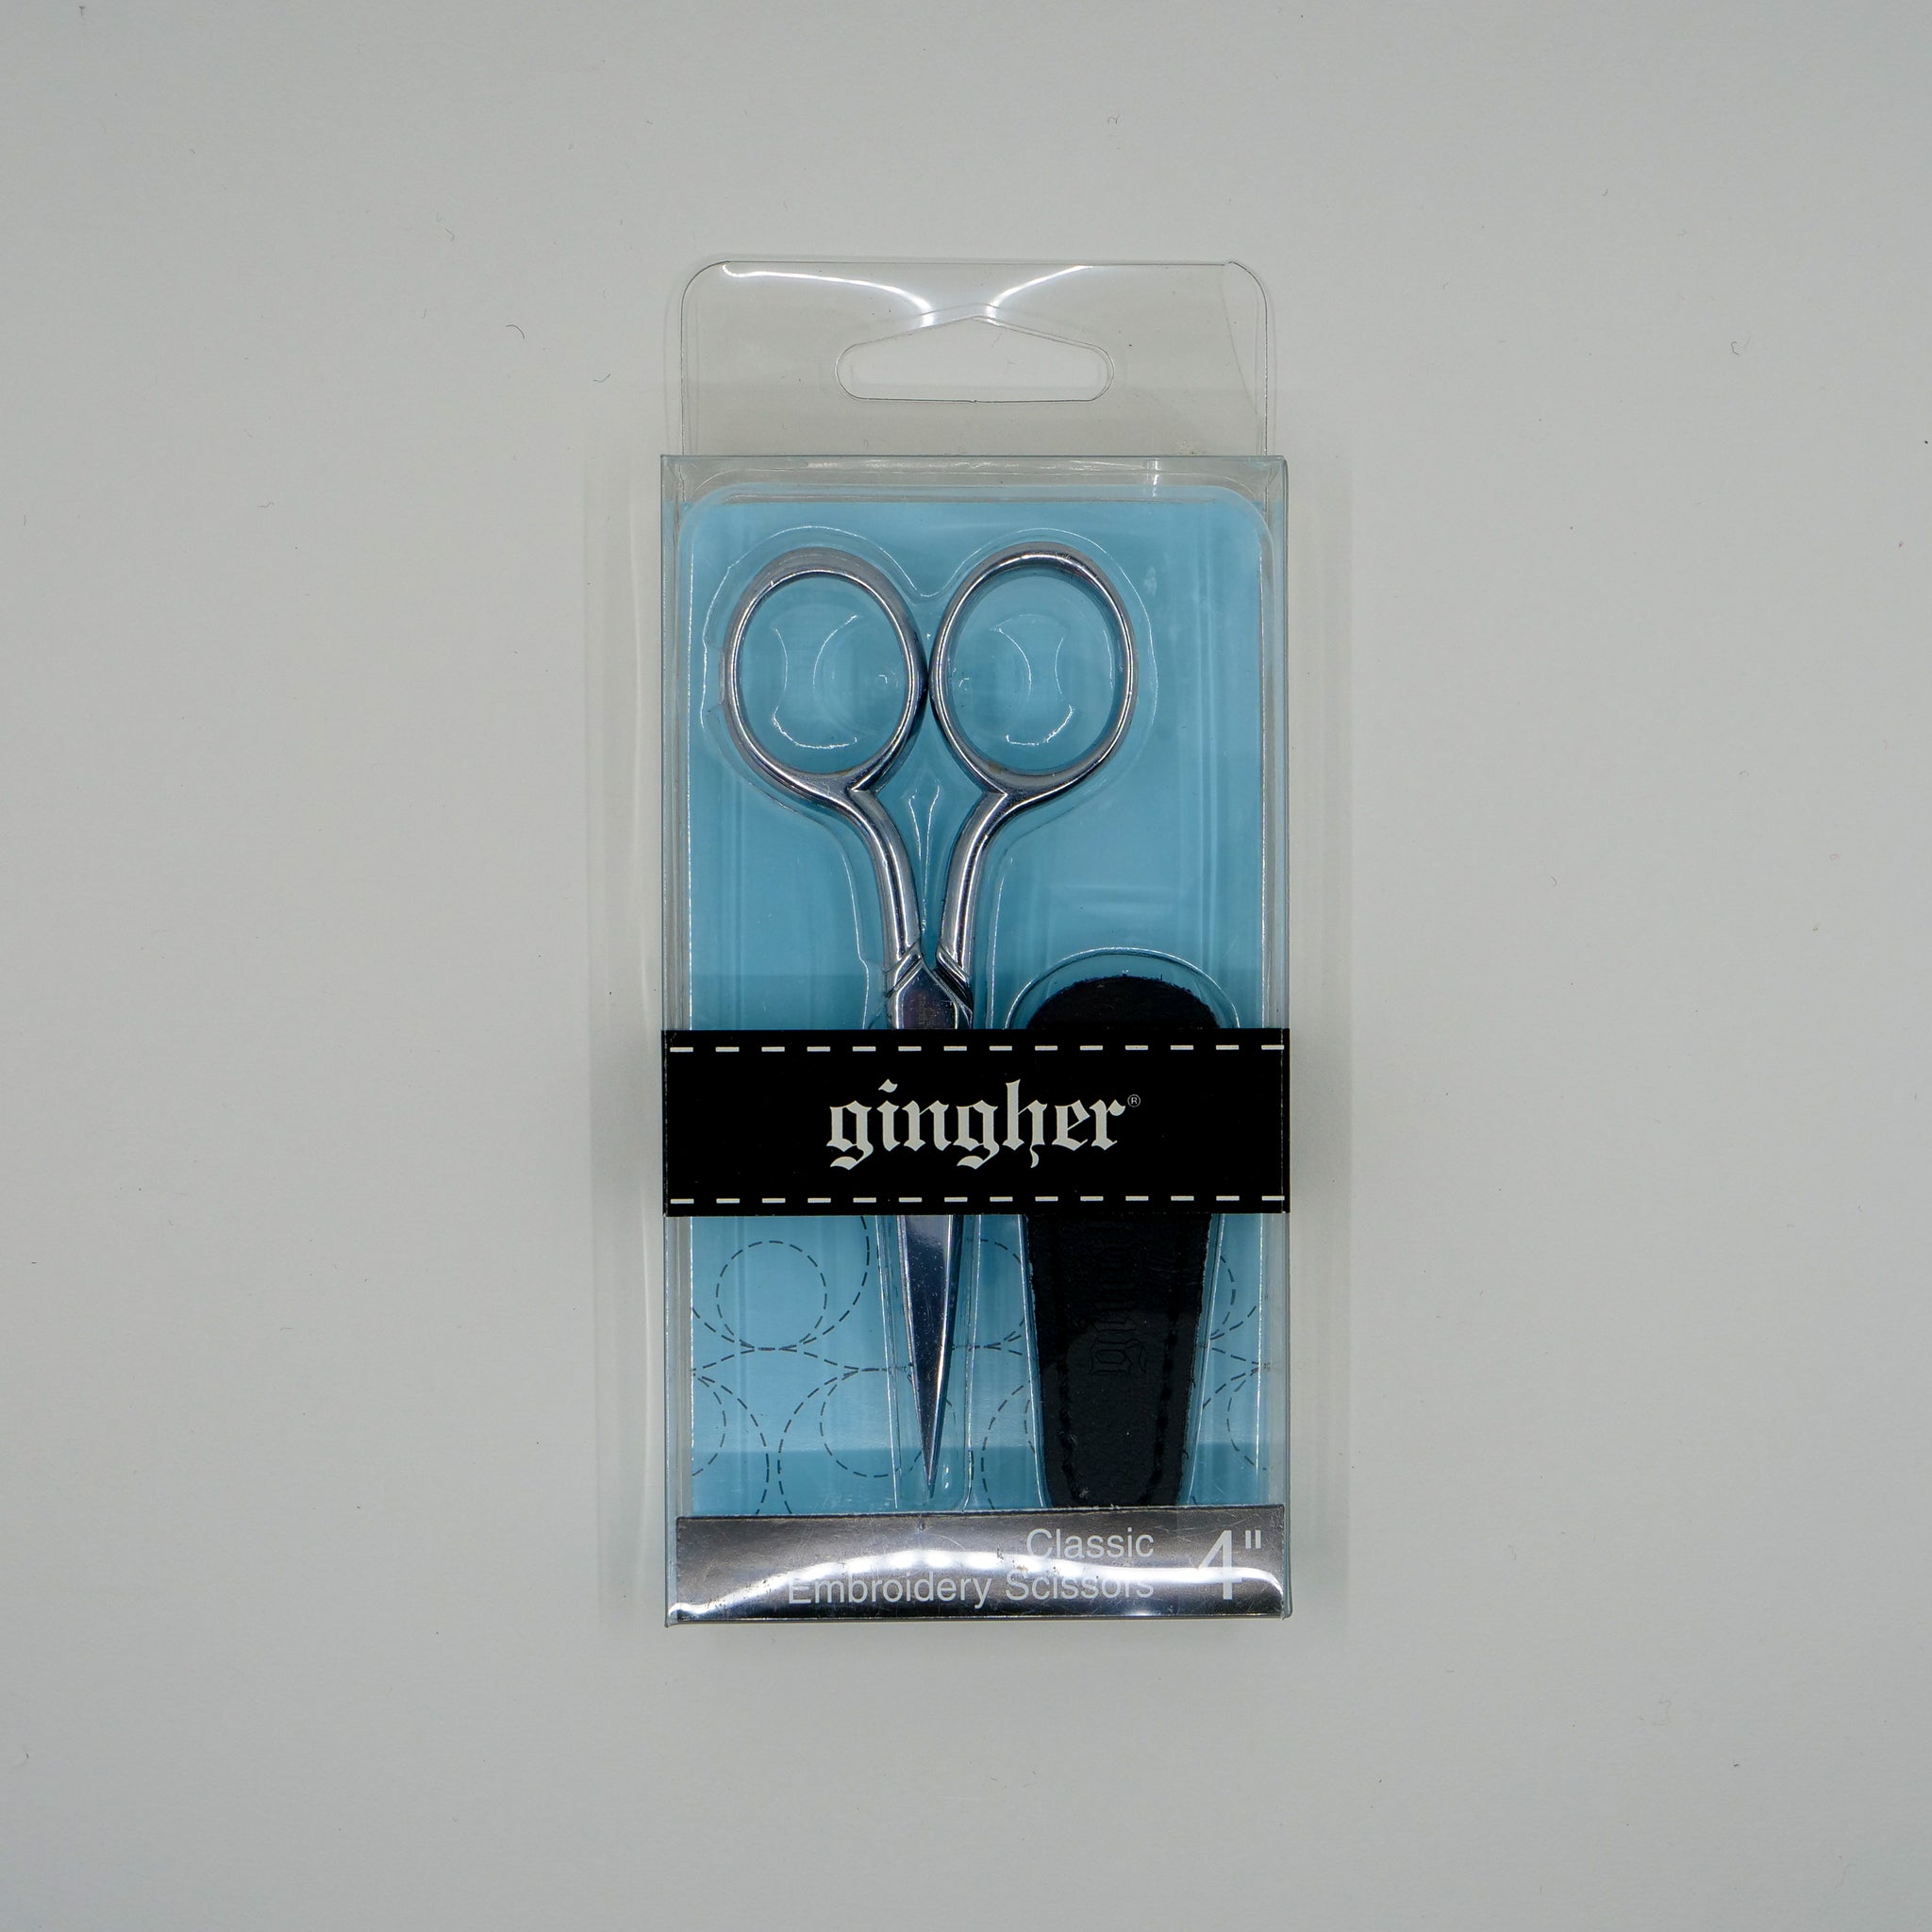 Scissors Gingher 4" Embroidery